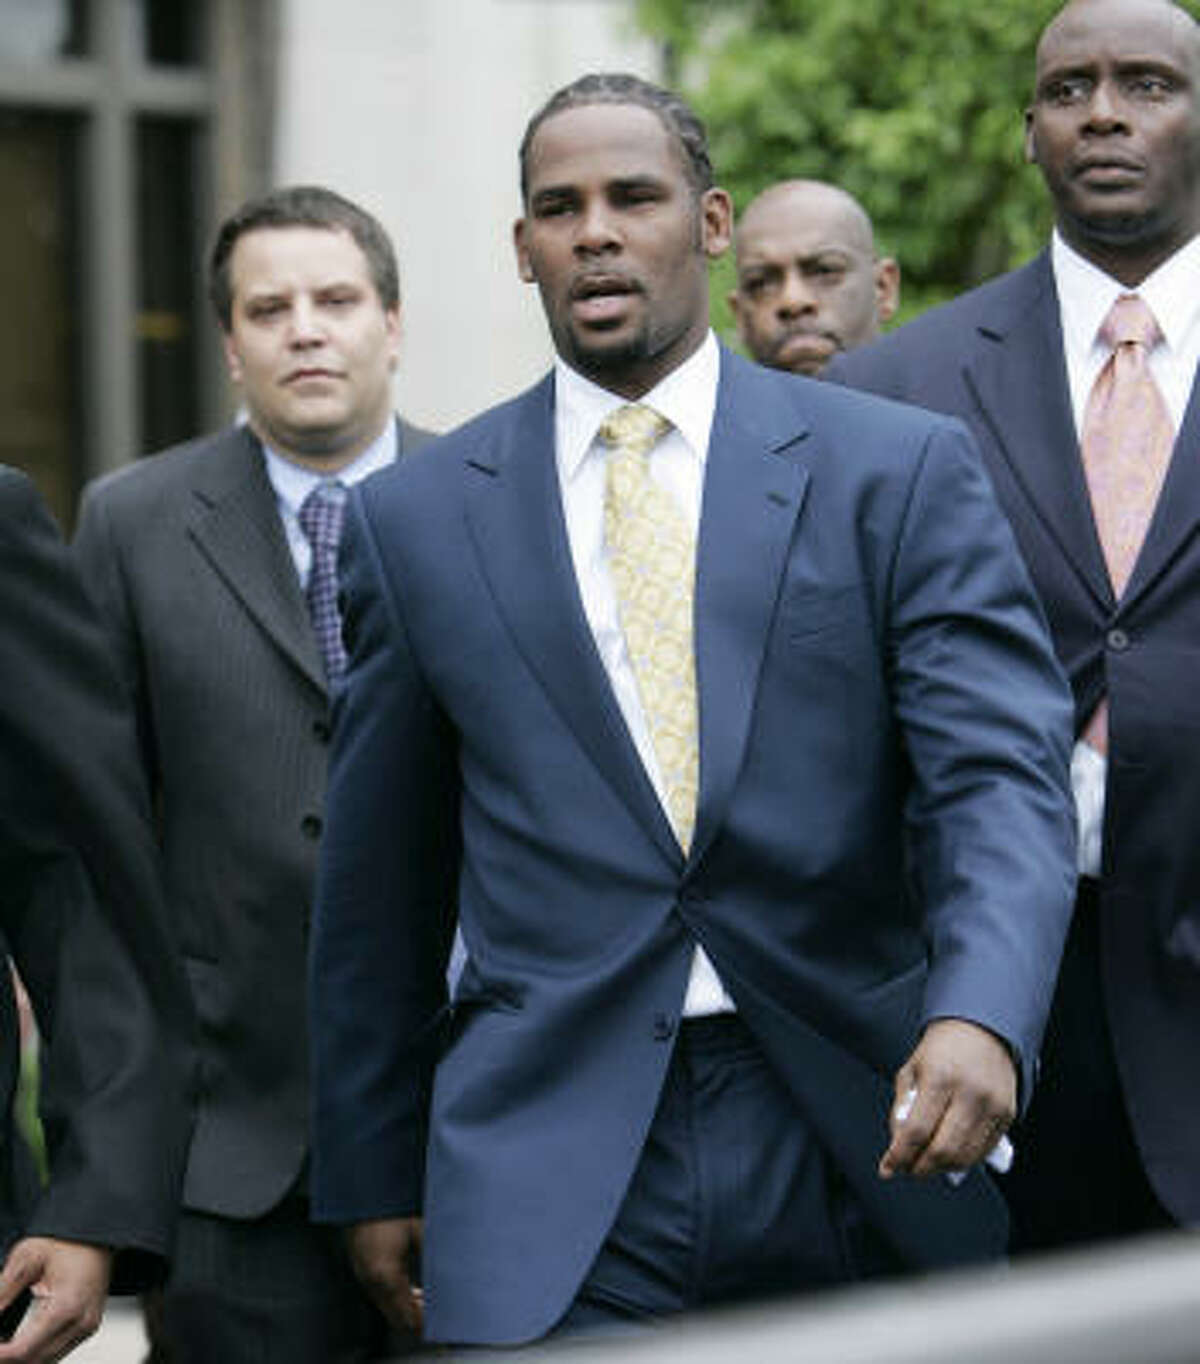 R Kelly Porn - R. Kelly found not guilty in child porn case